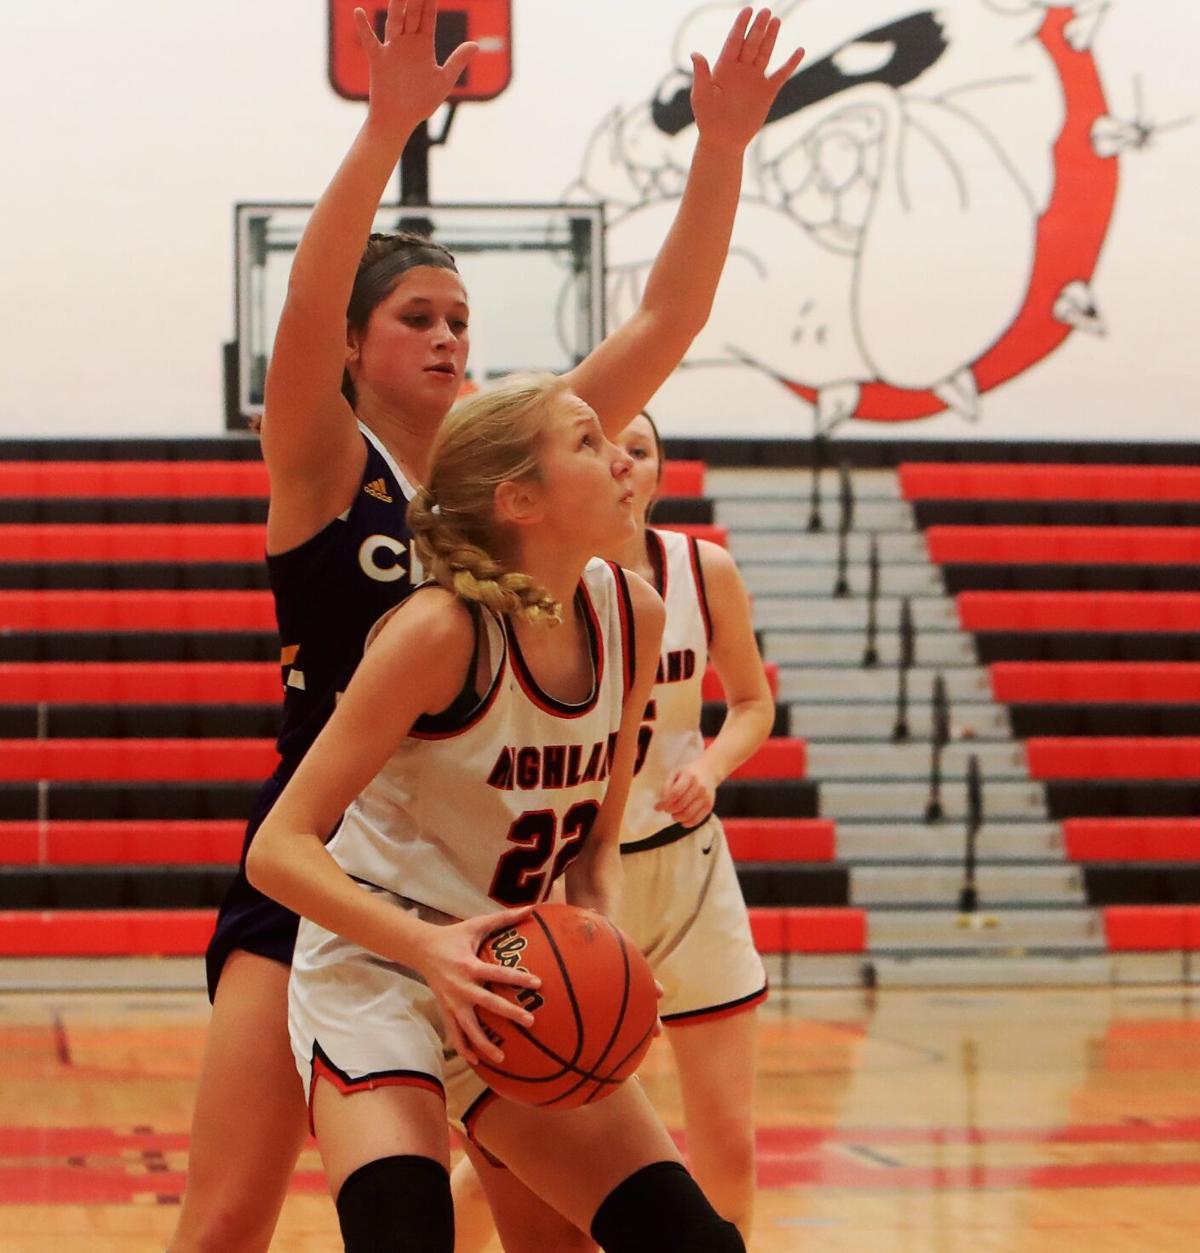 Women's Hoops Falls in Buzzer Beater on the Road - Clarion Athletics